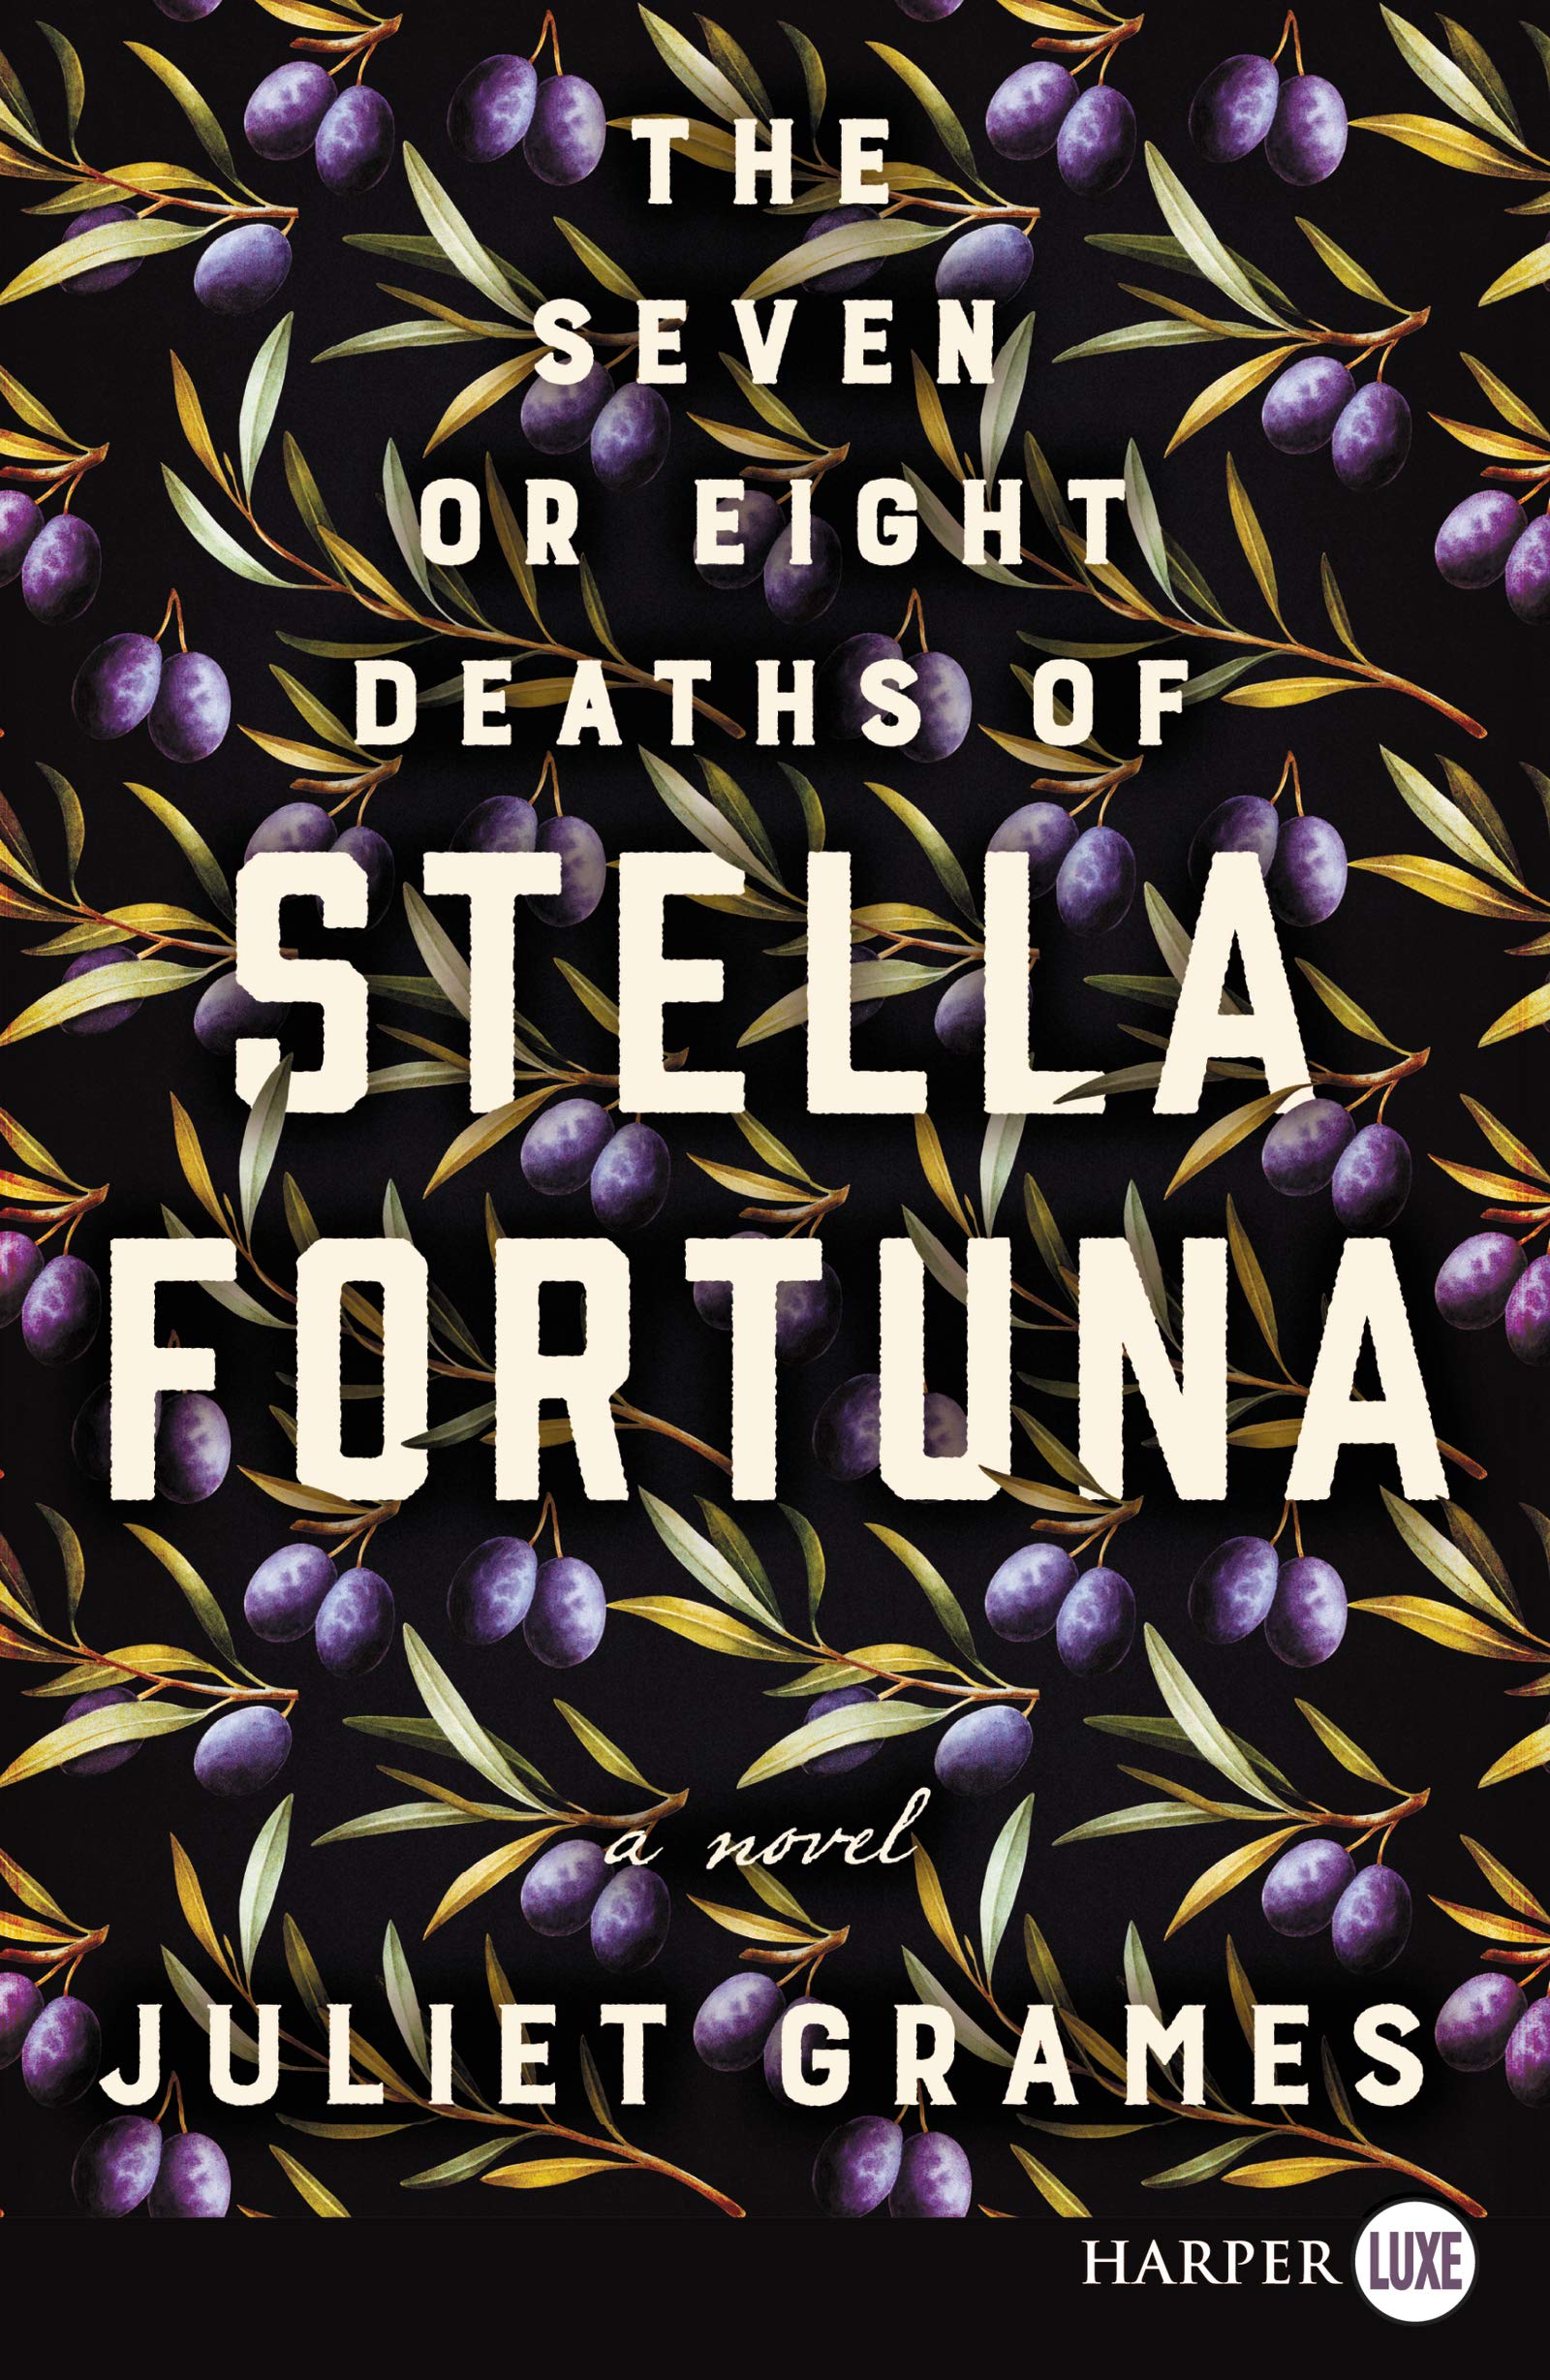 Dumbo Lit Book Club: The Seven or Eight Deaths of Stella Fortuna by Juliet Grames